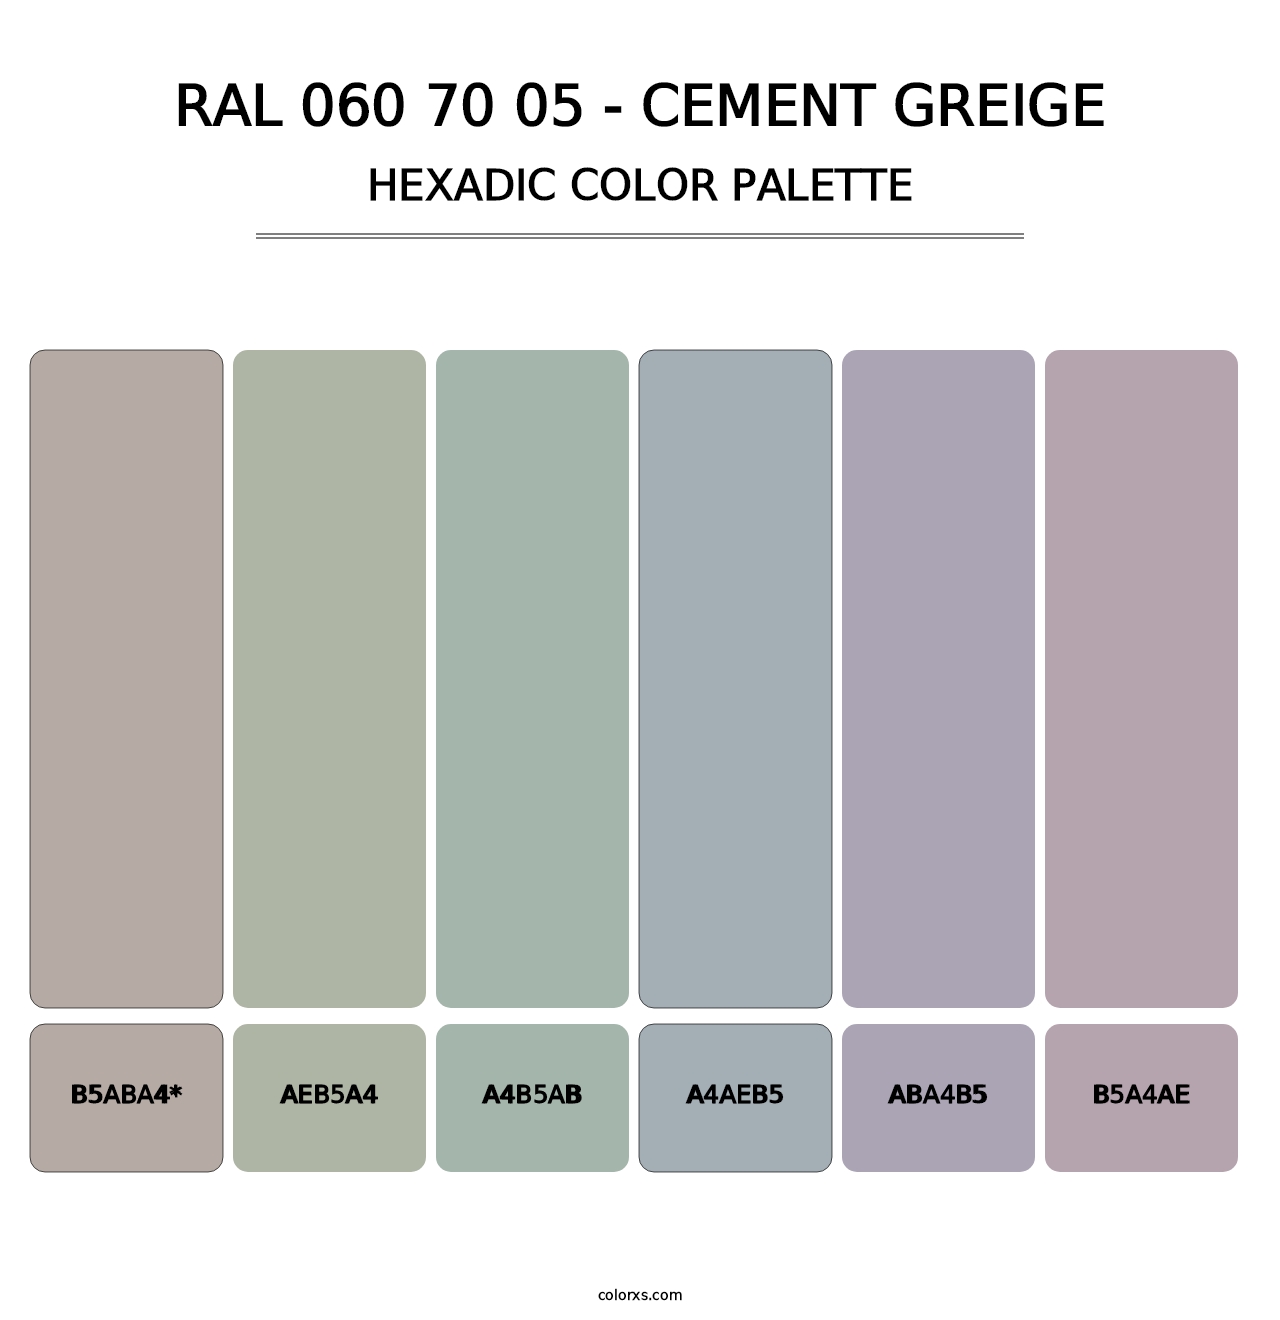 RAL 060 70 05 - Cement Greige - Hexadic Color Palette